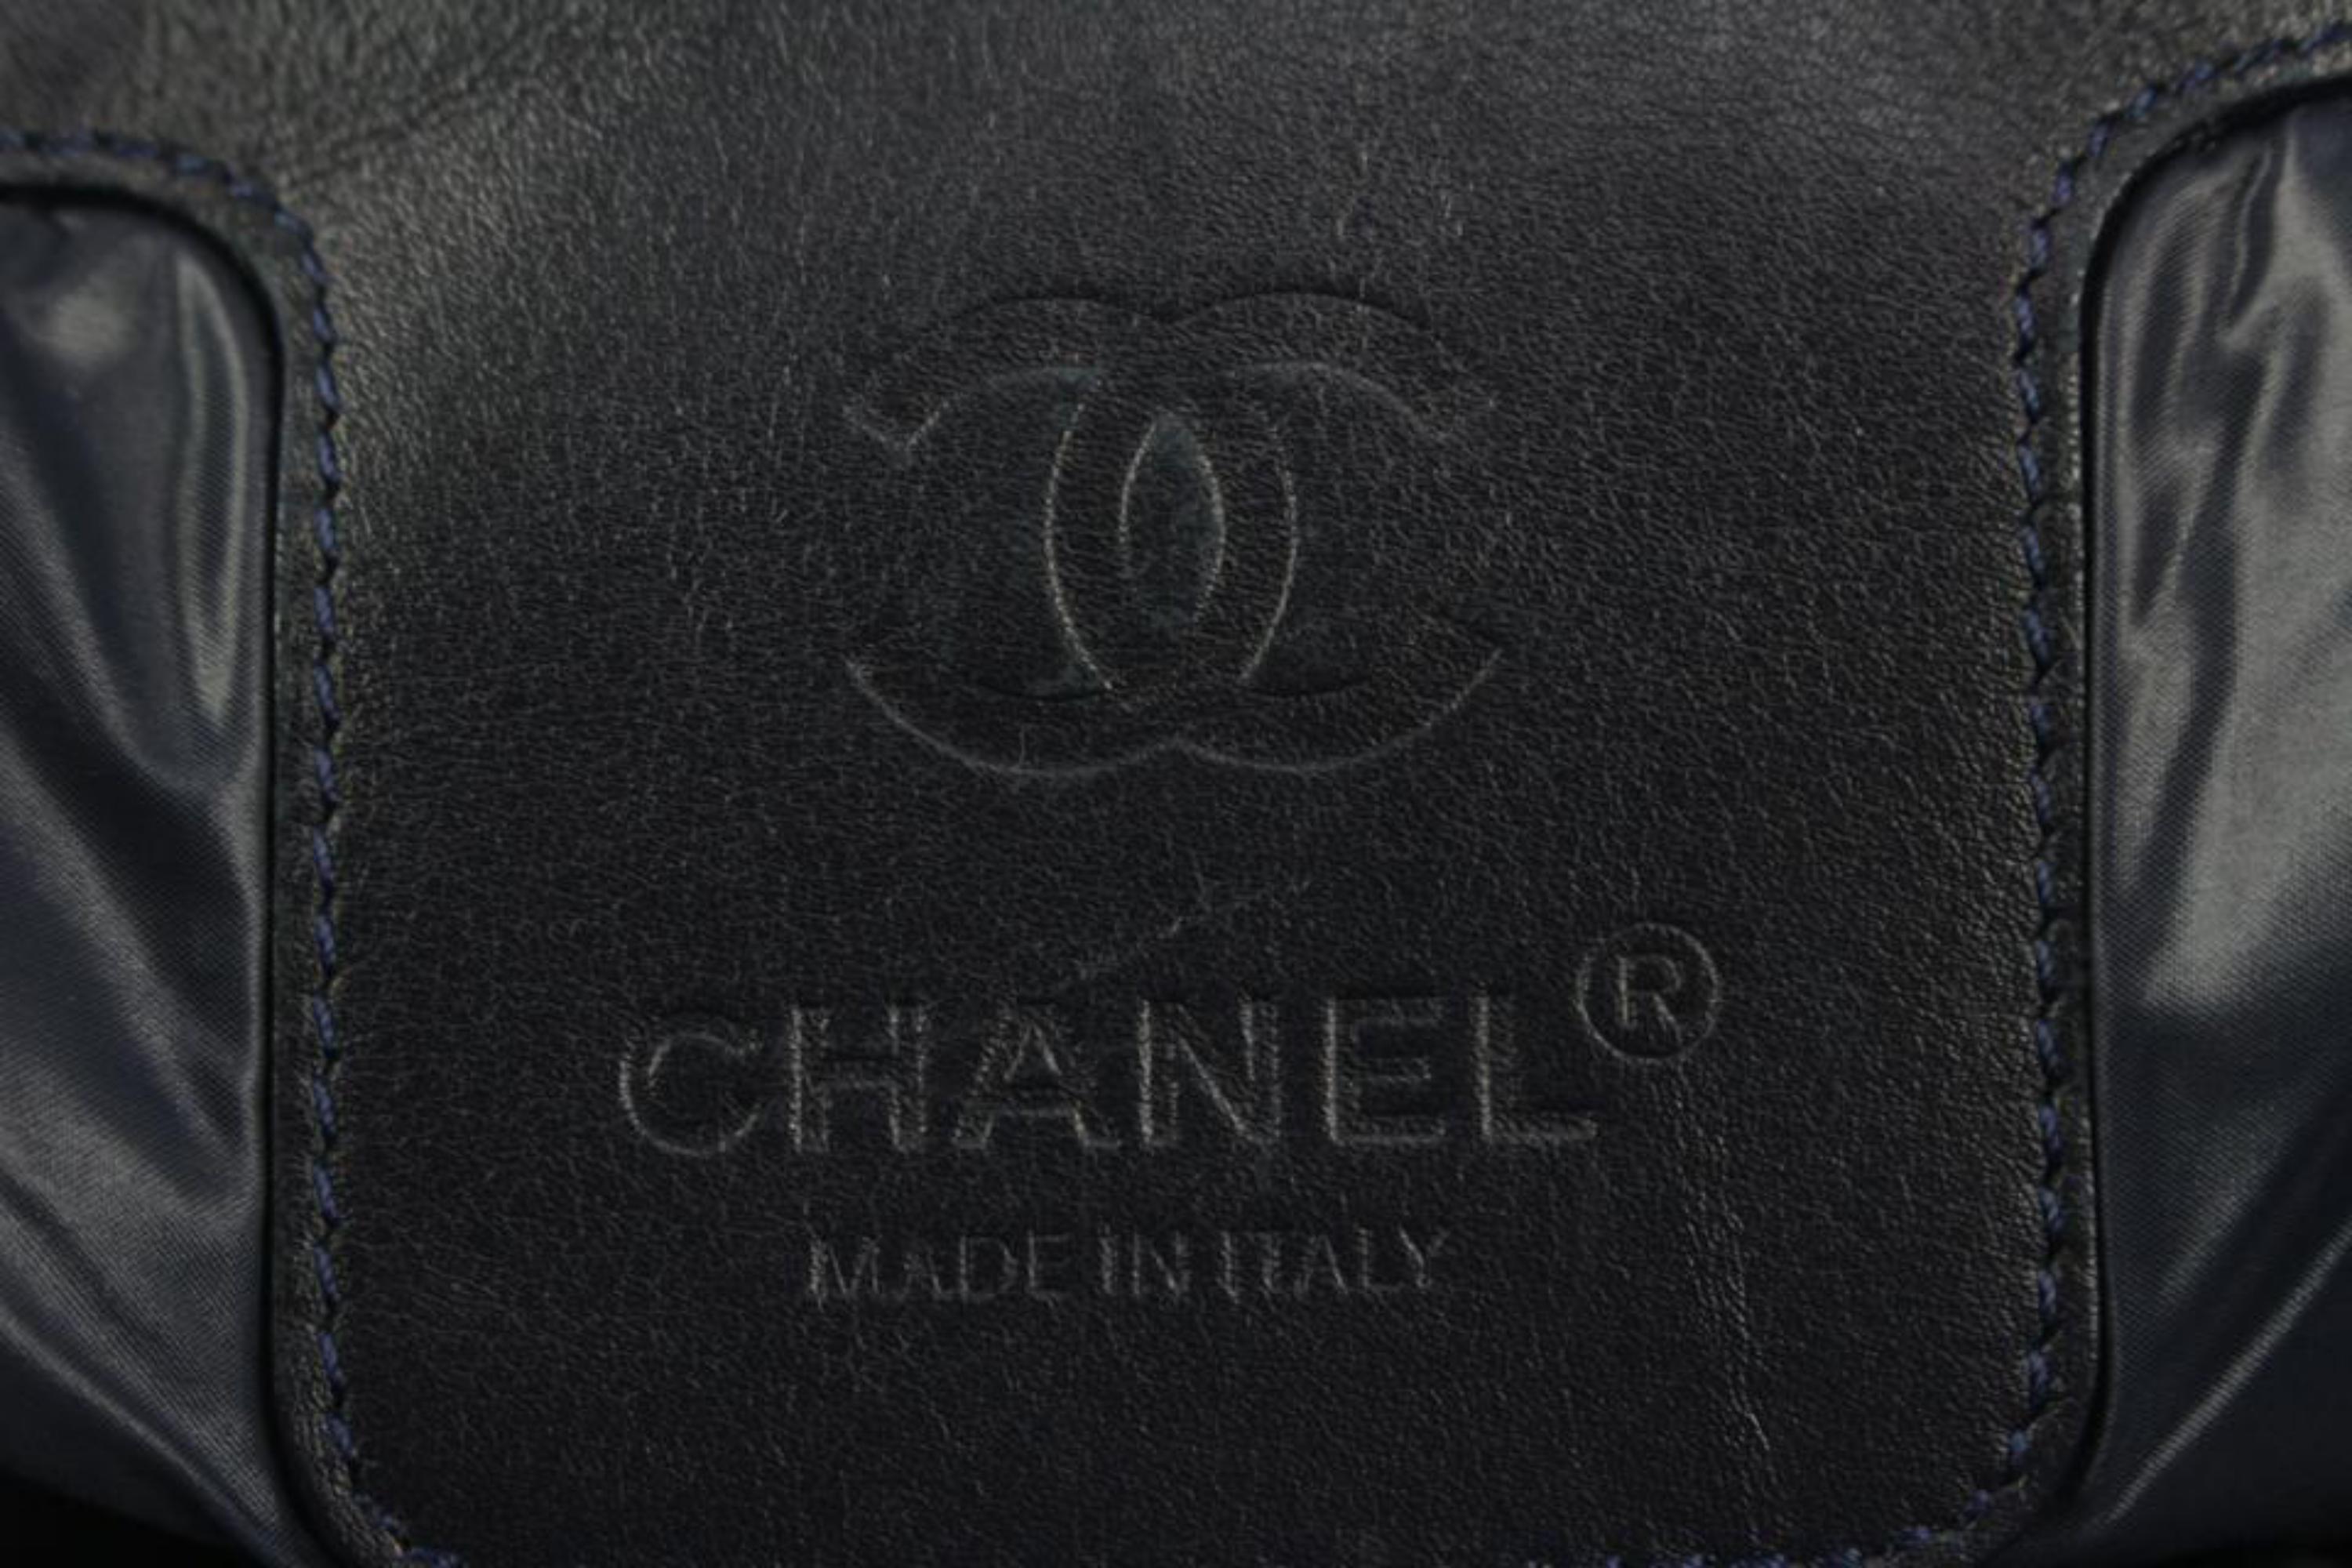 Chanel Grey Quilted Nylon Cocoon Tote Bag 1115c8 In Fair Condition For Sale In Dix hills, NY